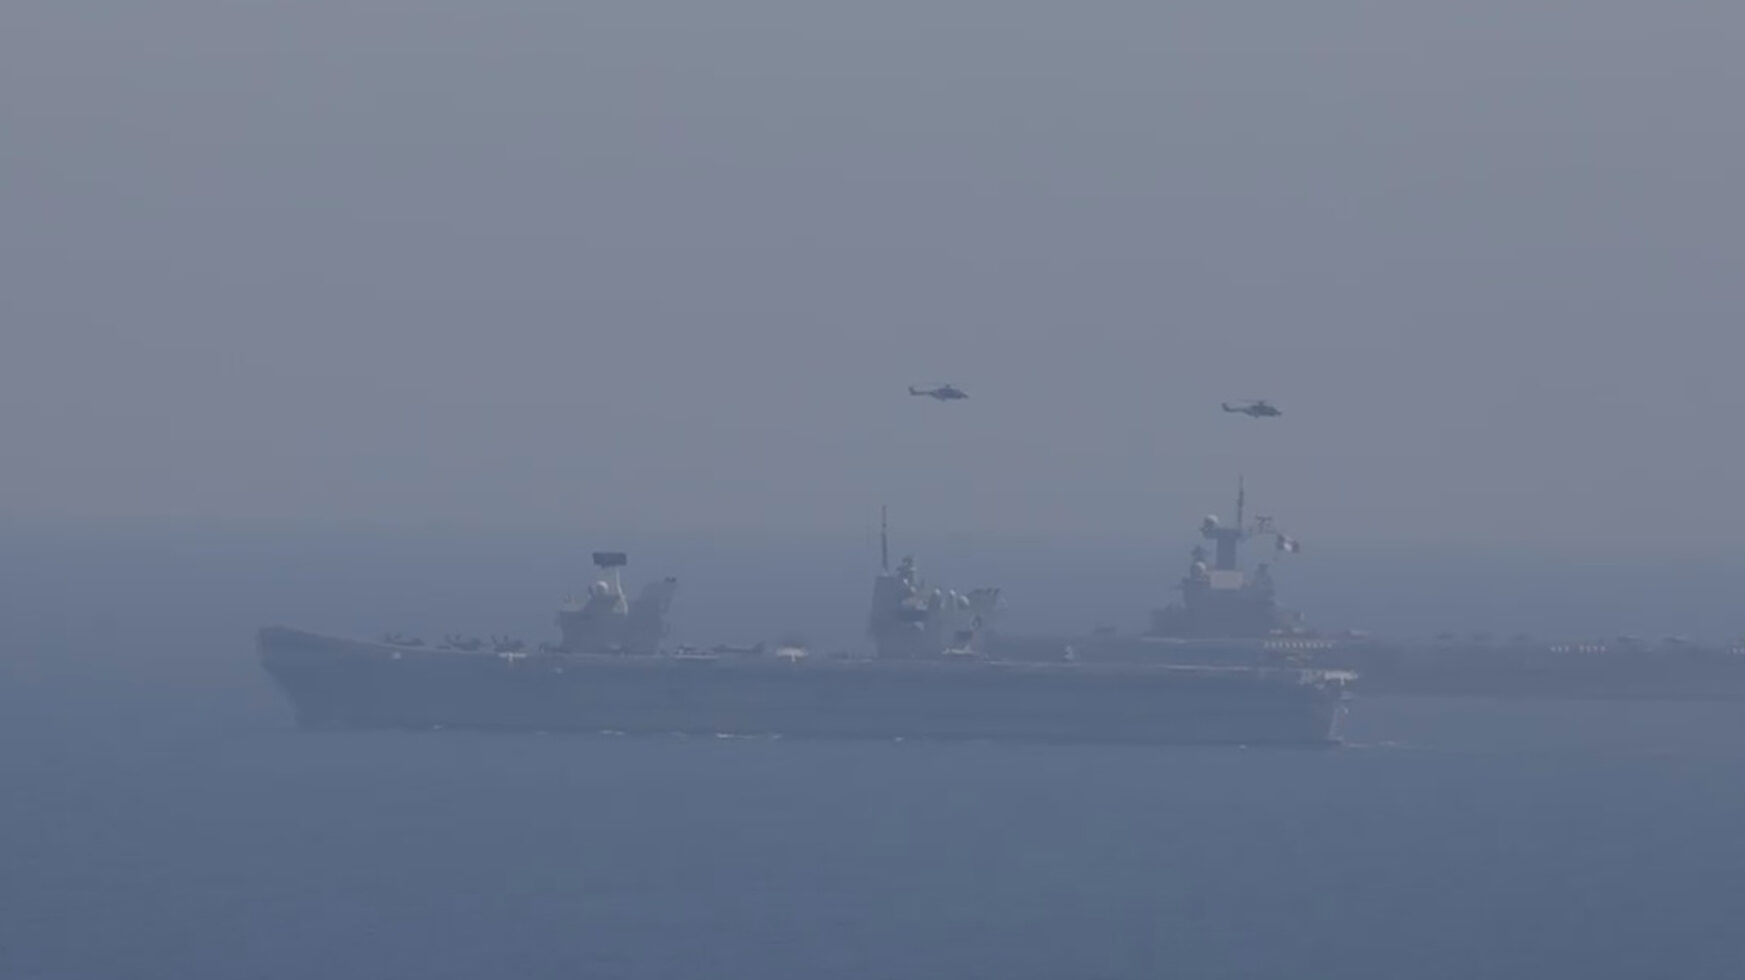 HMS Queen Elizabeth and FS Charles side-by-side for the first time in the Mediterranean Sea on the 4th of June 2021. (Royal Navy/Newsflash)